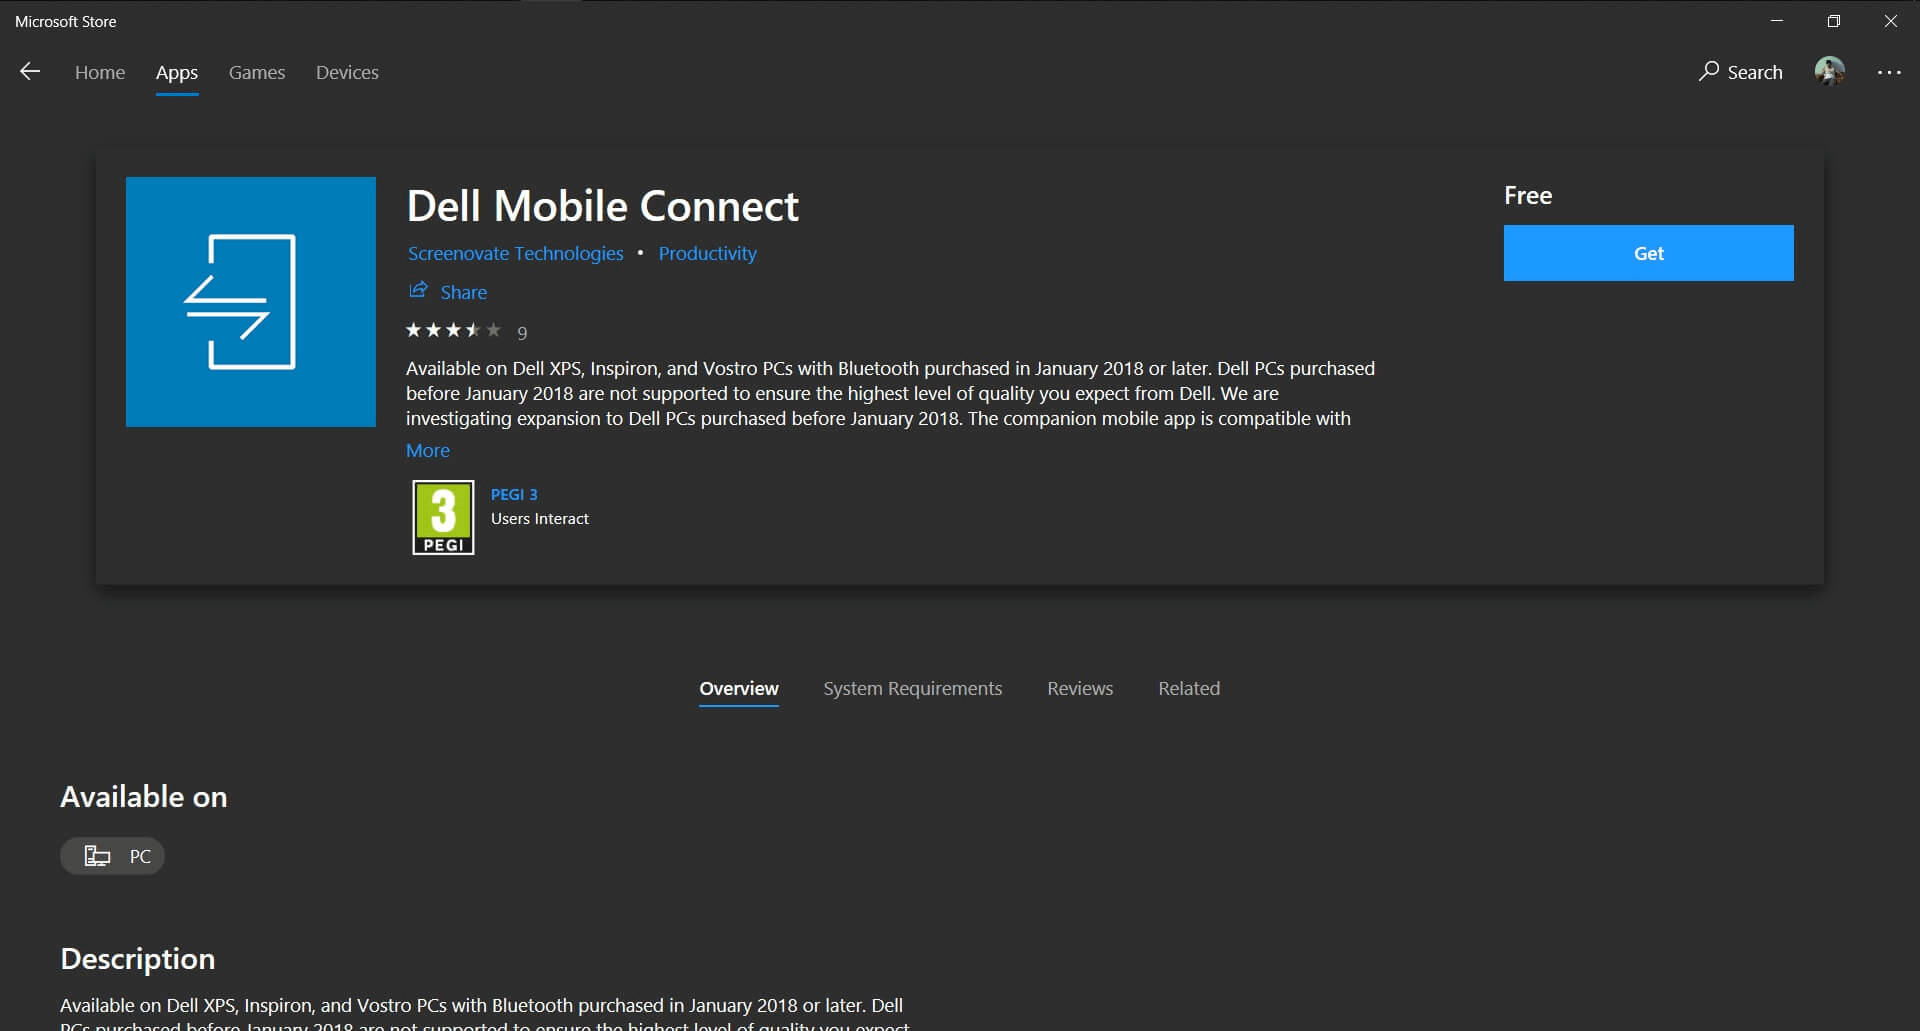 Download Dell Mobile Connect on PC